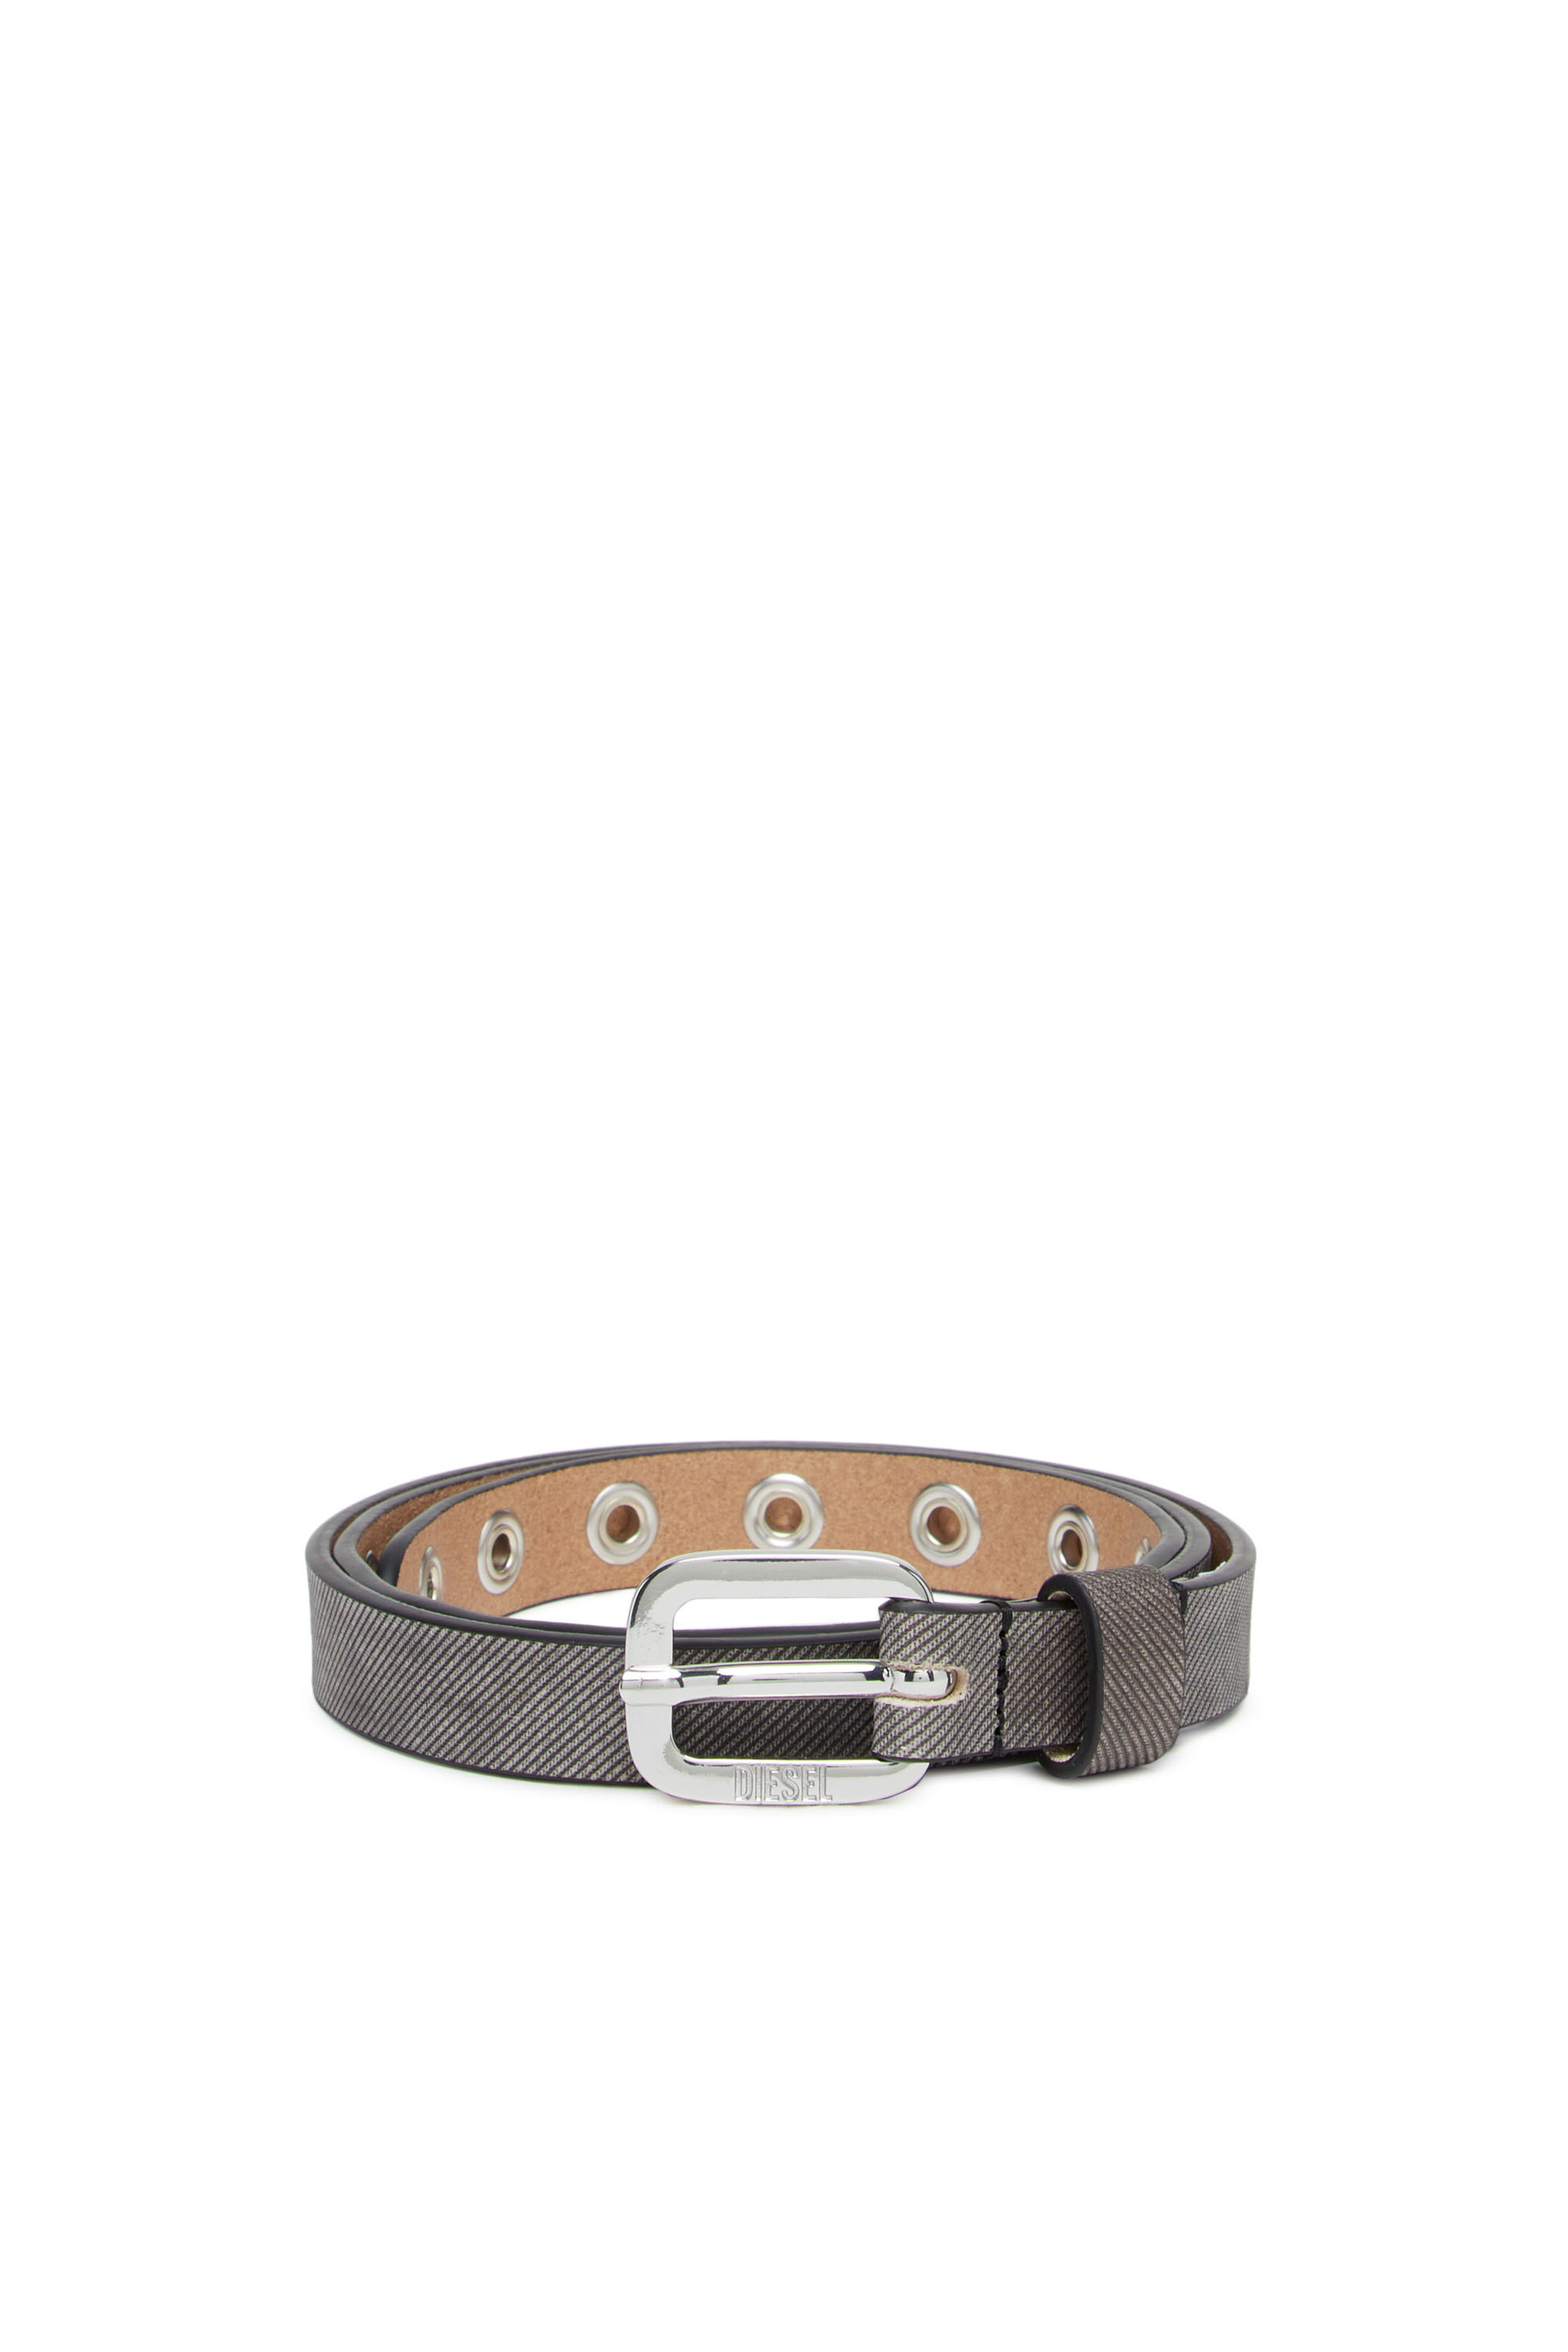 Diesel Studded Leather Belt With Denim Effect In Grey